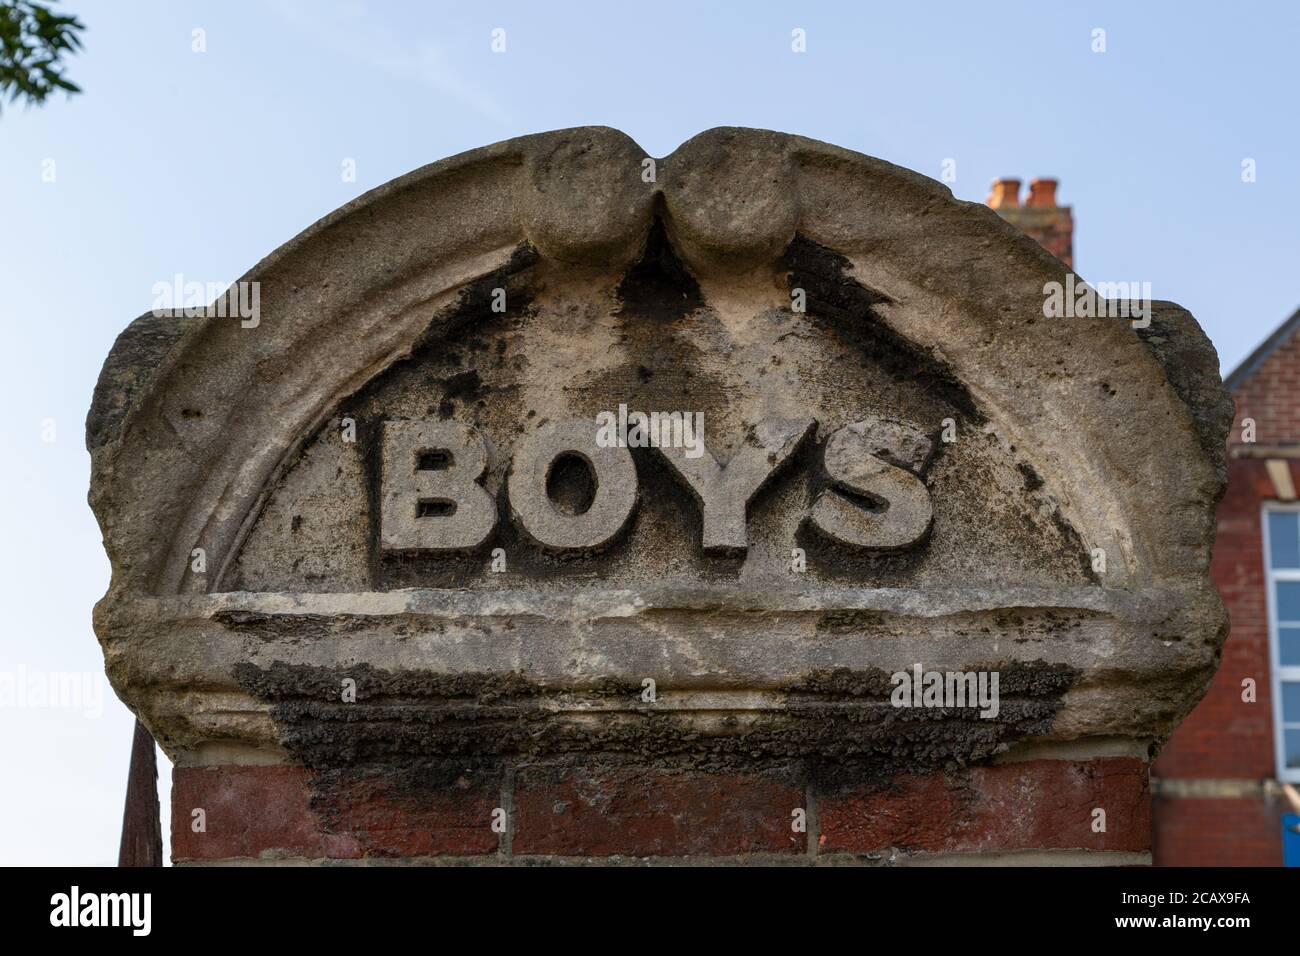 A brick pillar outside a school with the words Boys a common sight on the entrance to a school in the Victorian era when children were segregated Stock Photo